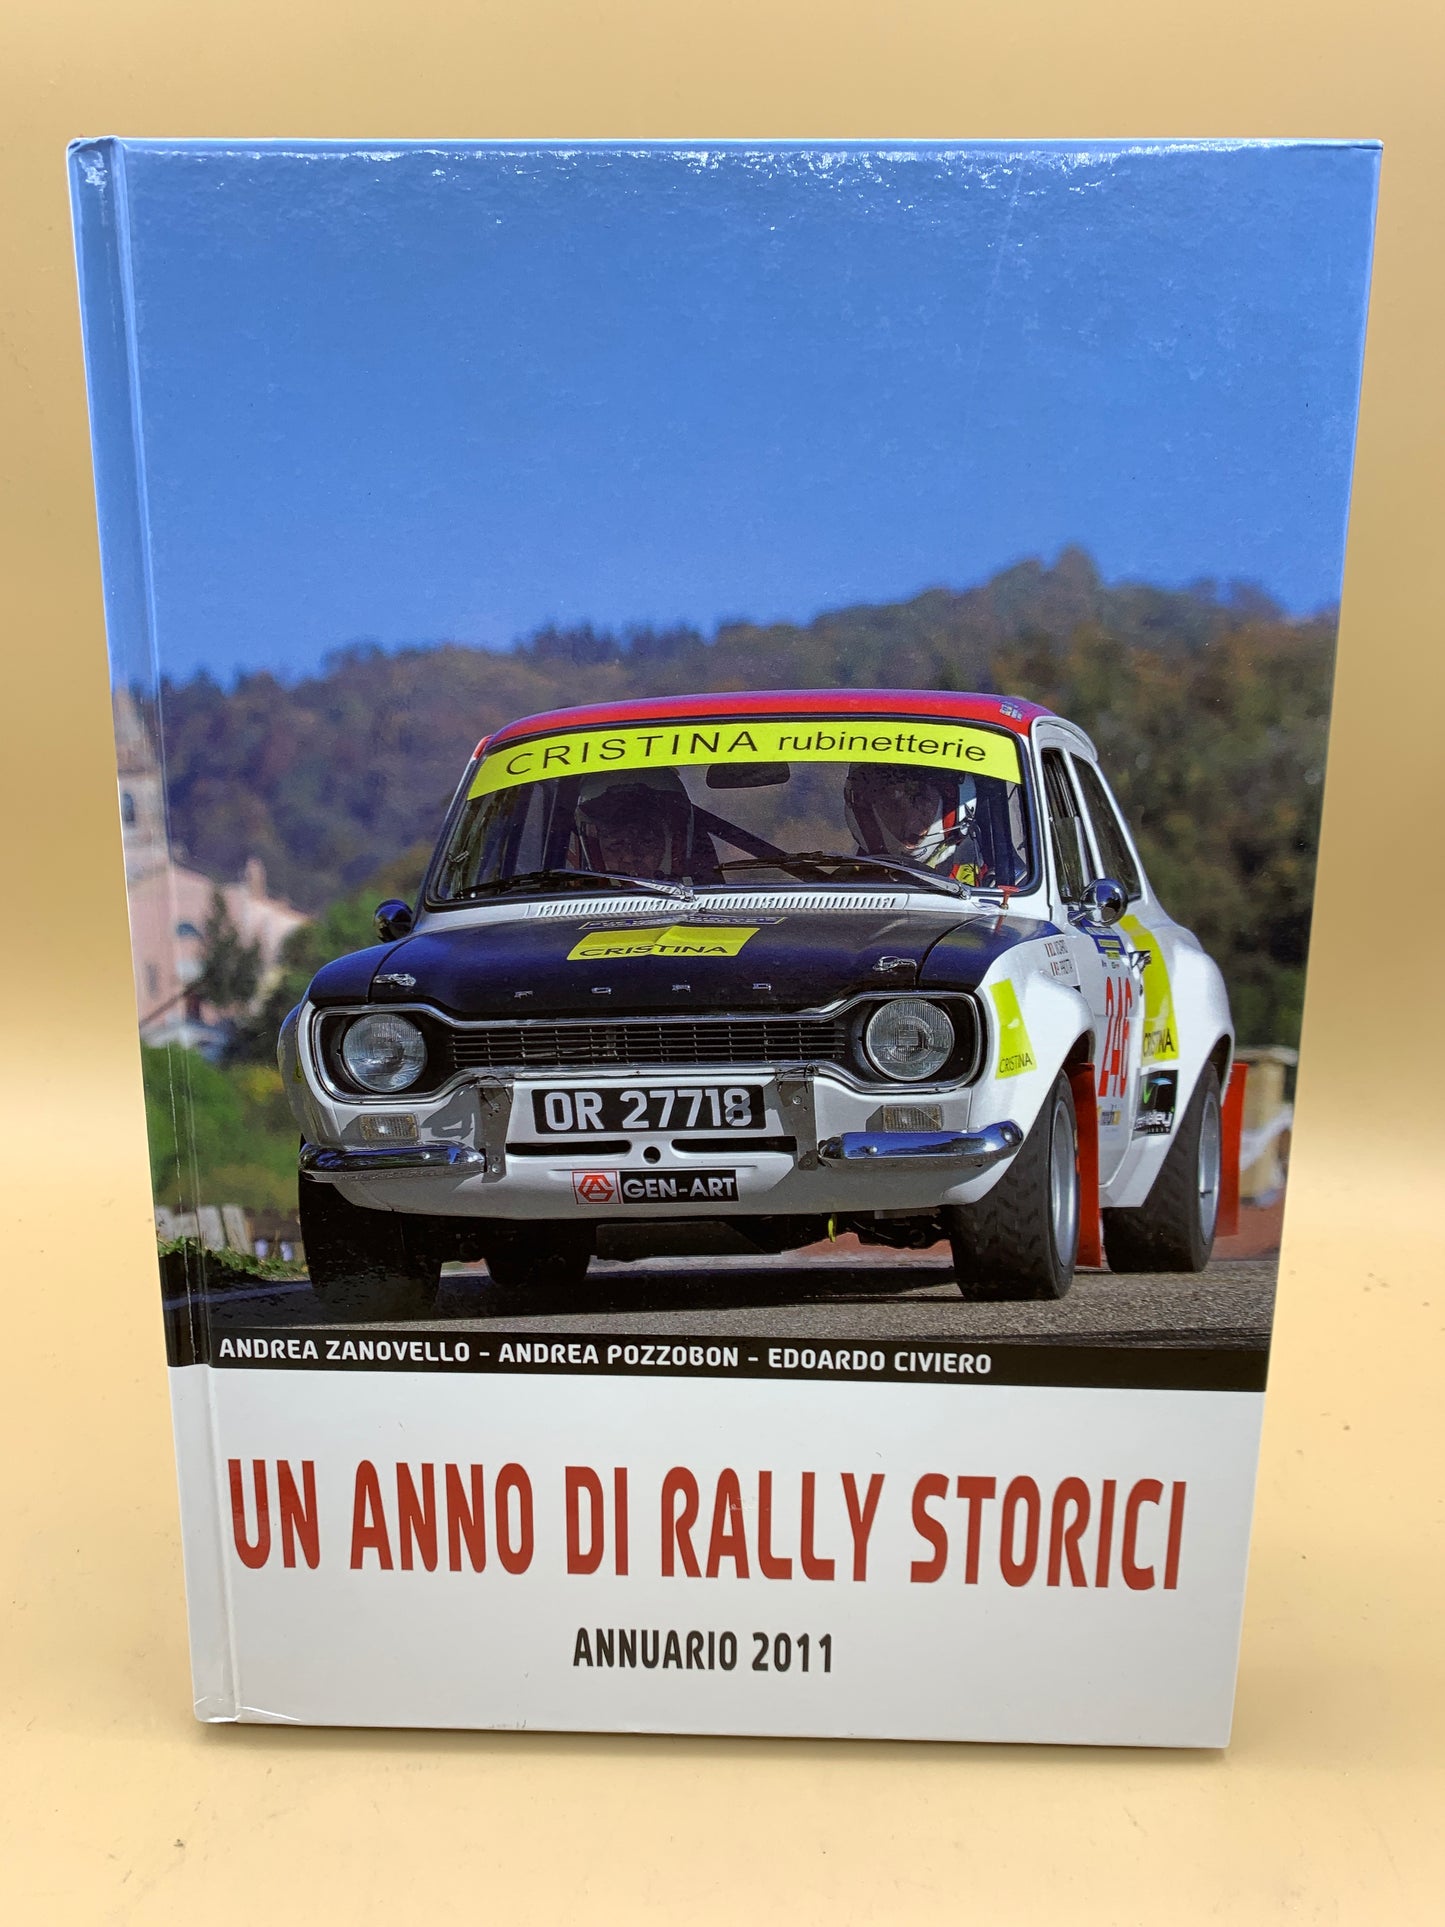 A year of historic rallies - 2011 yearbook